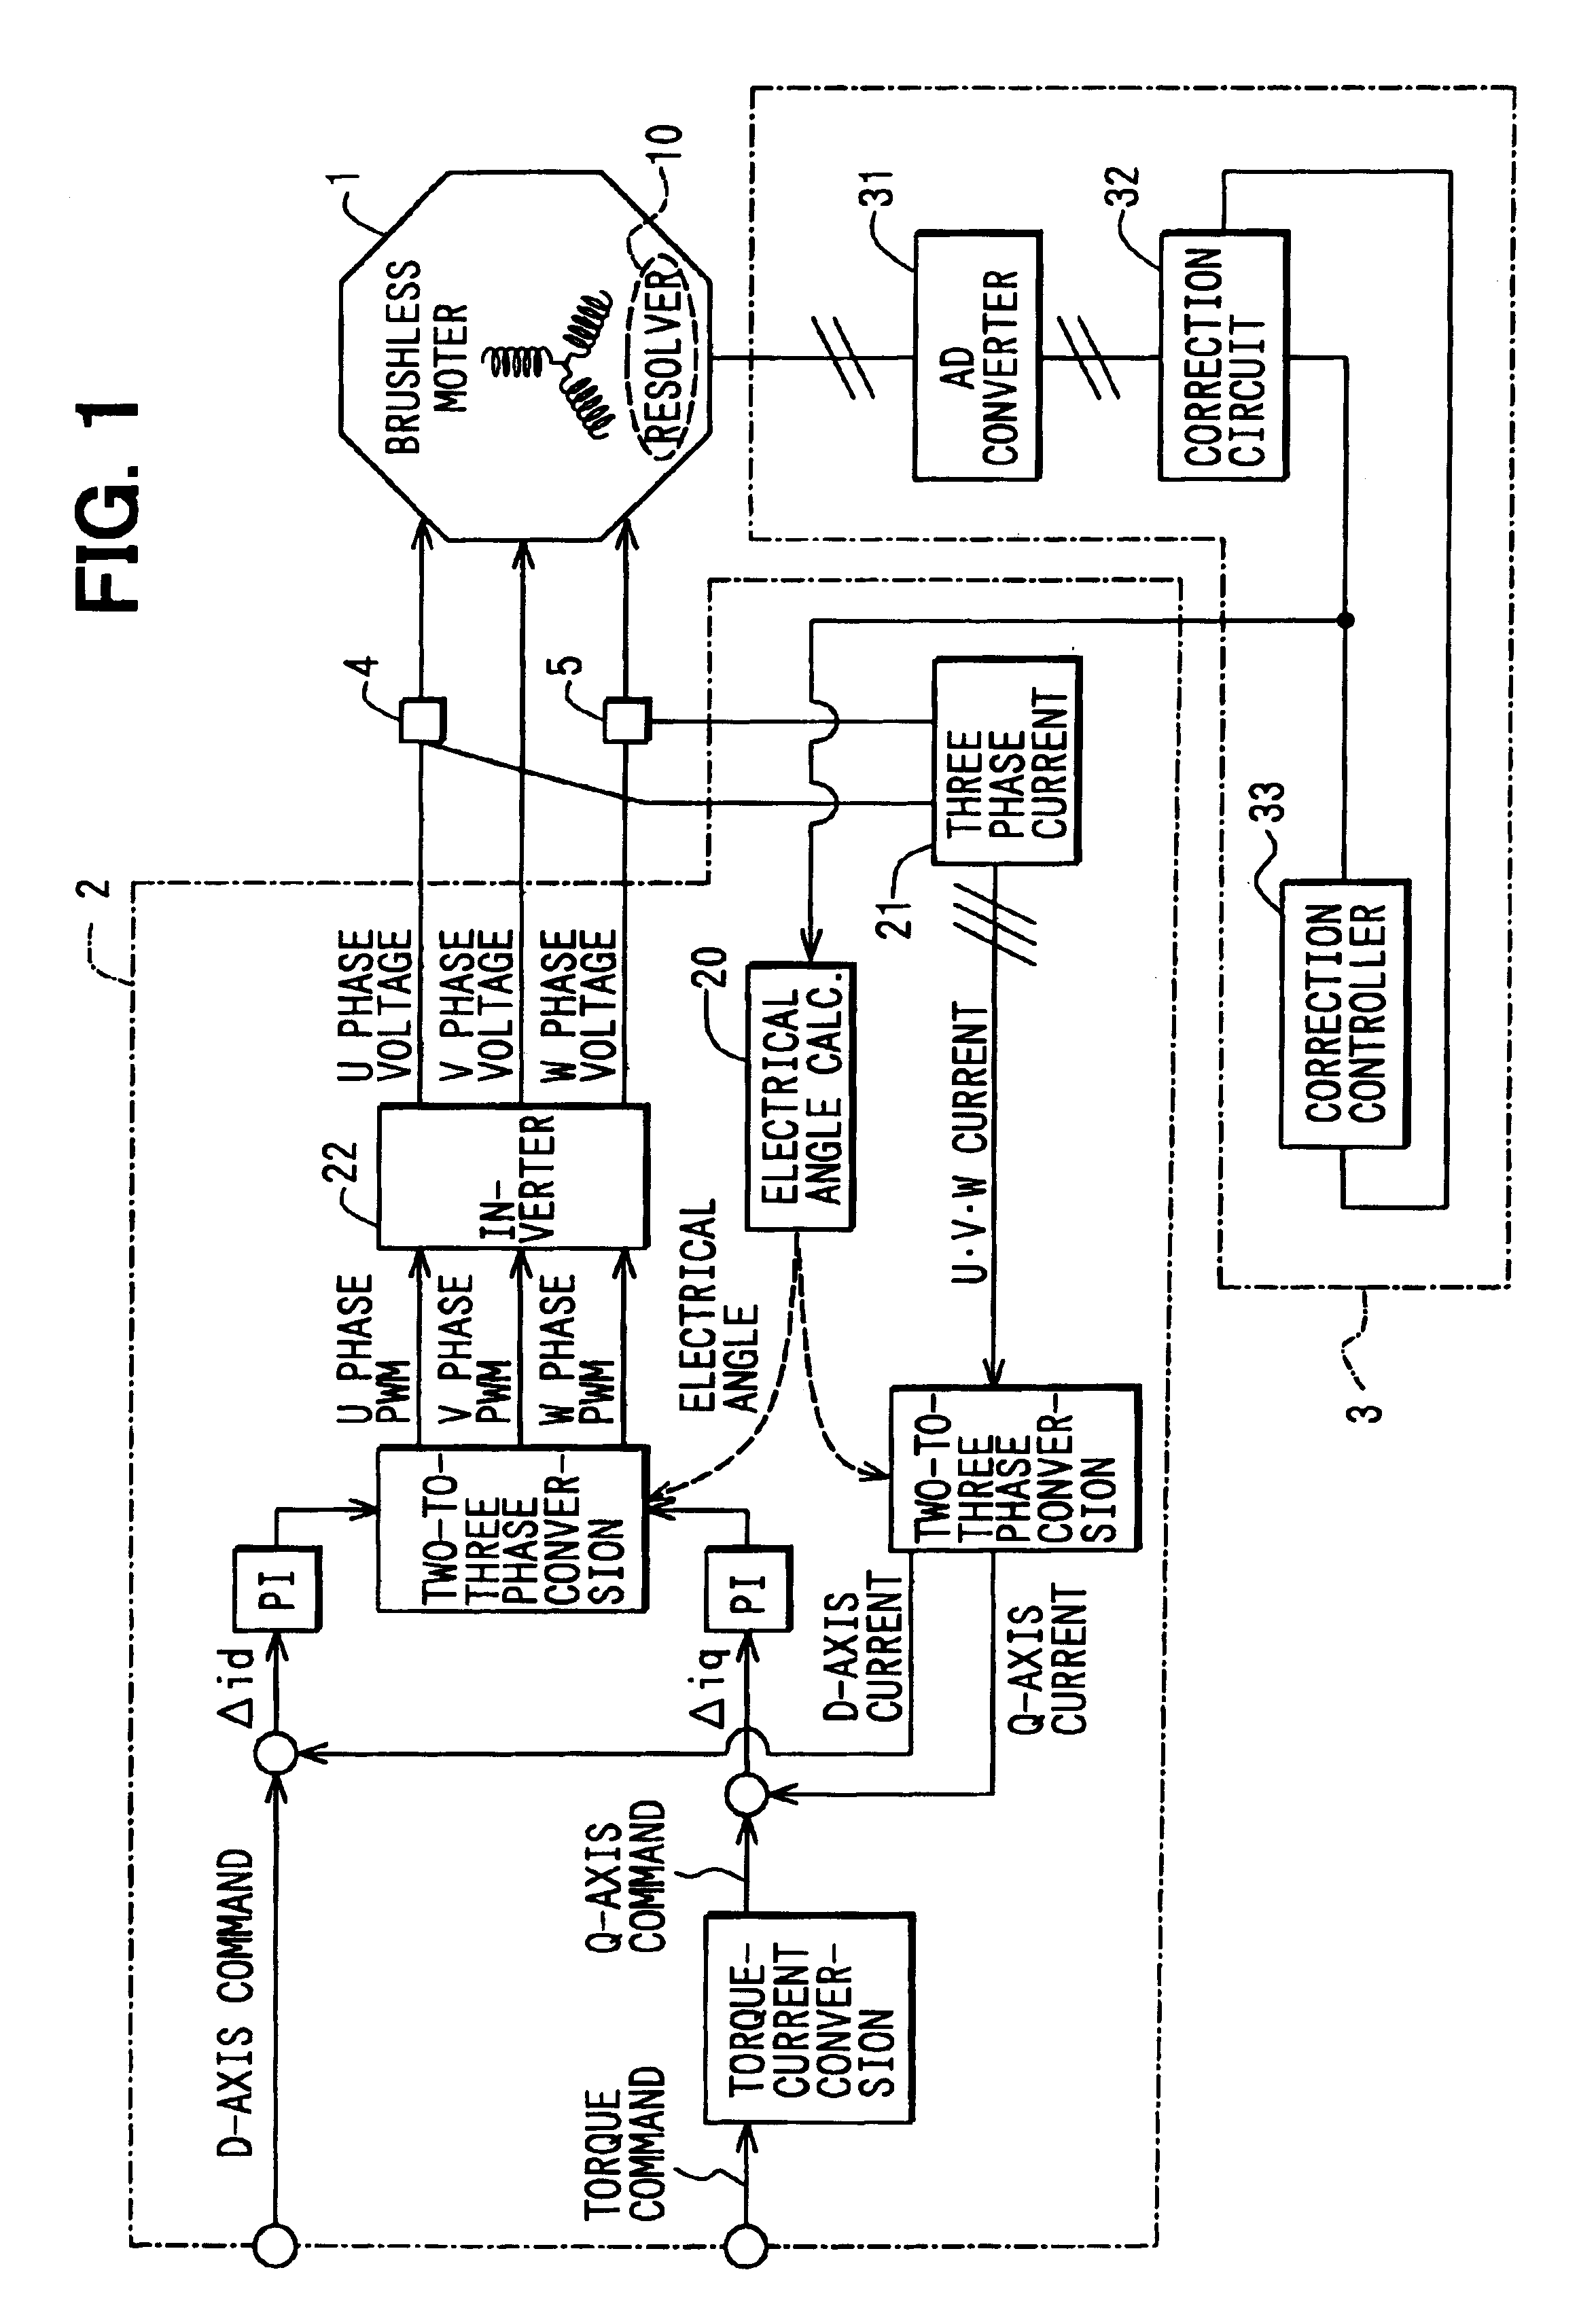 Method and apparatus for correcting resolver output